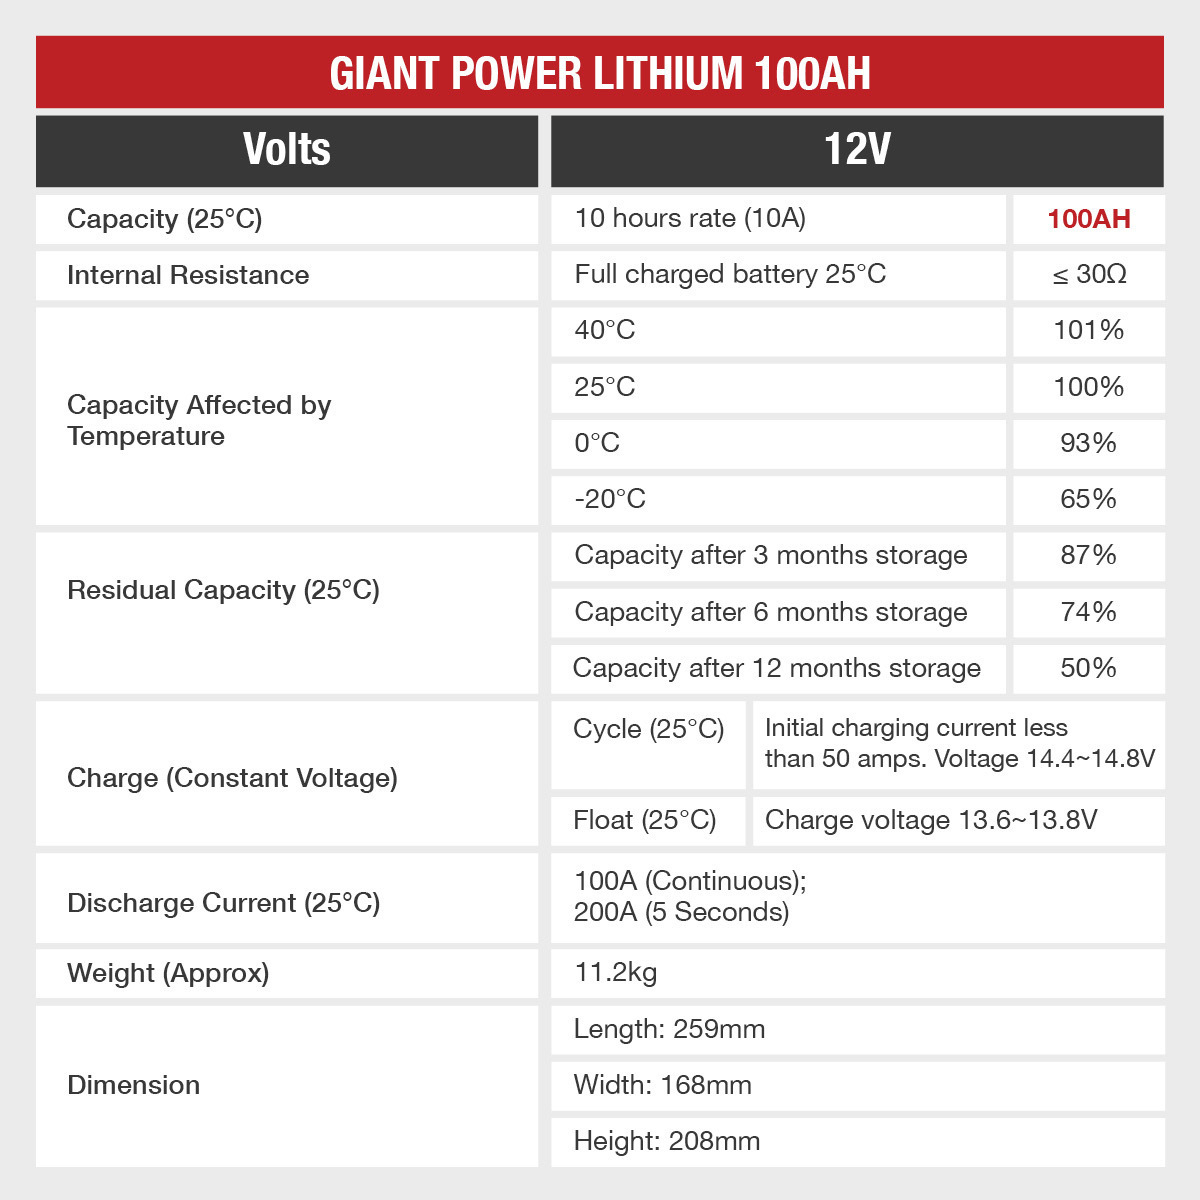 Giant 100AH Specifications